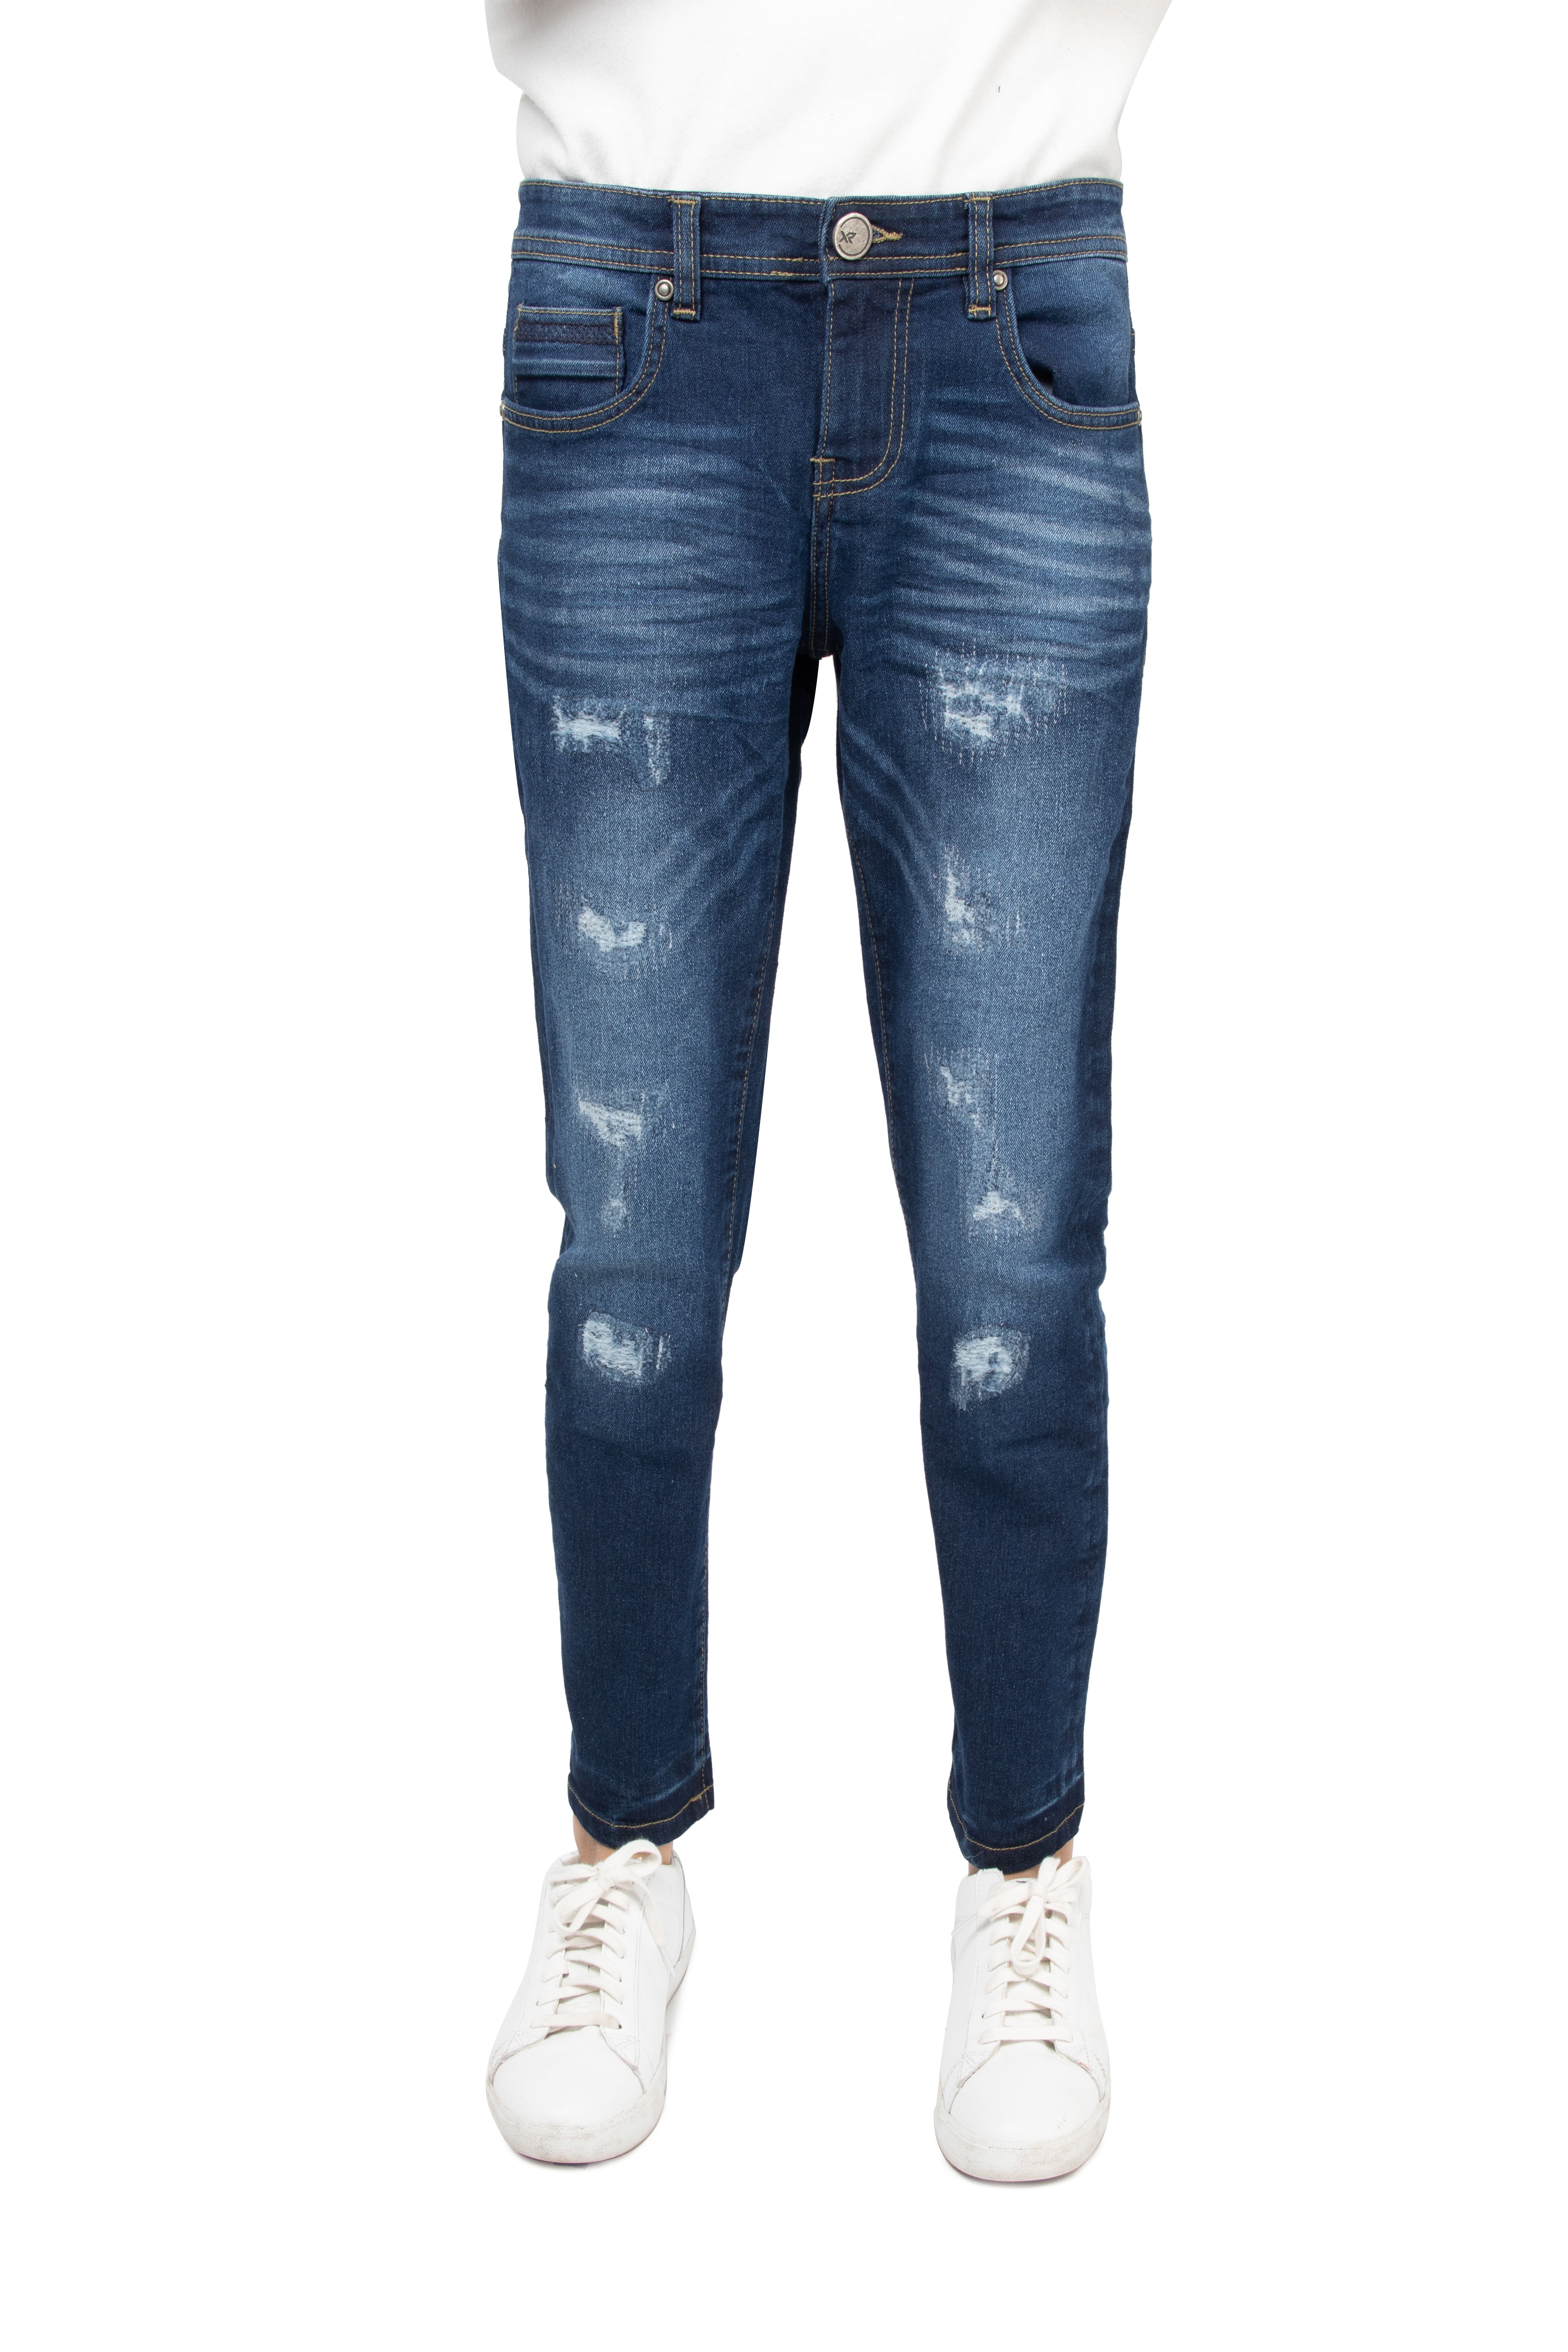 Mens Slim Fit Light Blue Knee Length Damage Jeans For Men With Ripped  Design And Hollow Out Detail Streetwear 230512 From Huan04, $29.2 |  DHgate.Com